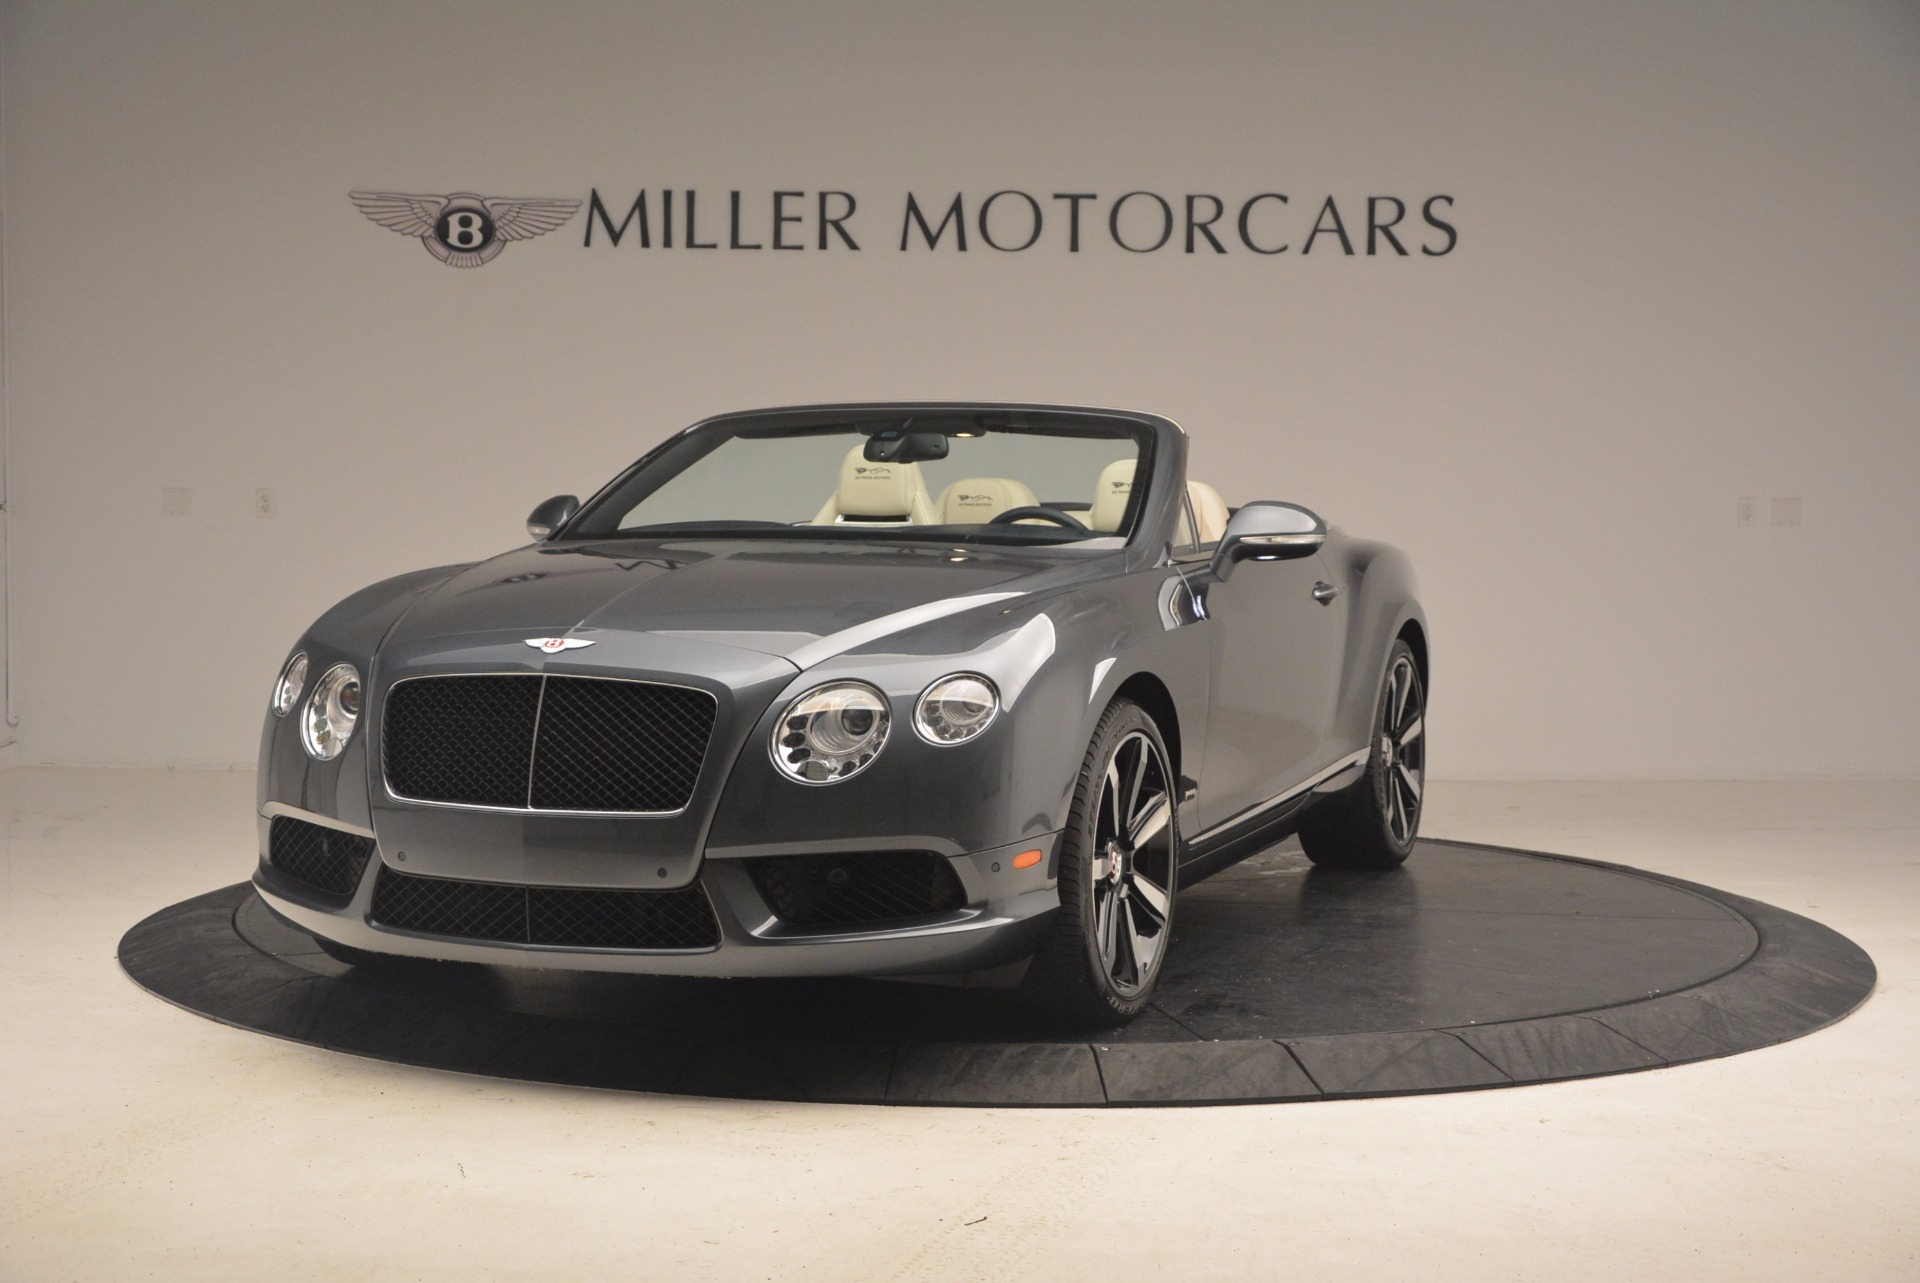 Used 2013 Bentley Continental GT V8 Le Mans Edition, 1 of 48 for sale Sold at Aston Martin of Greenwich in Greenwich CT 06830 1